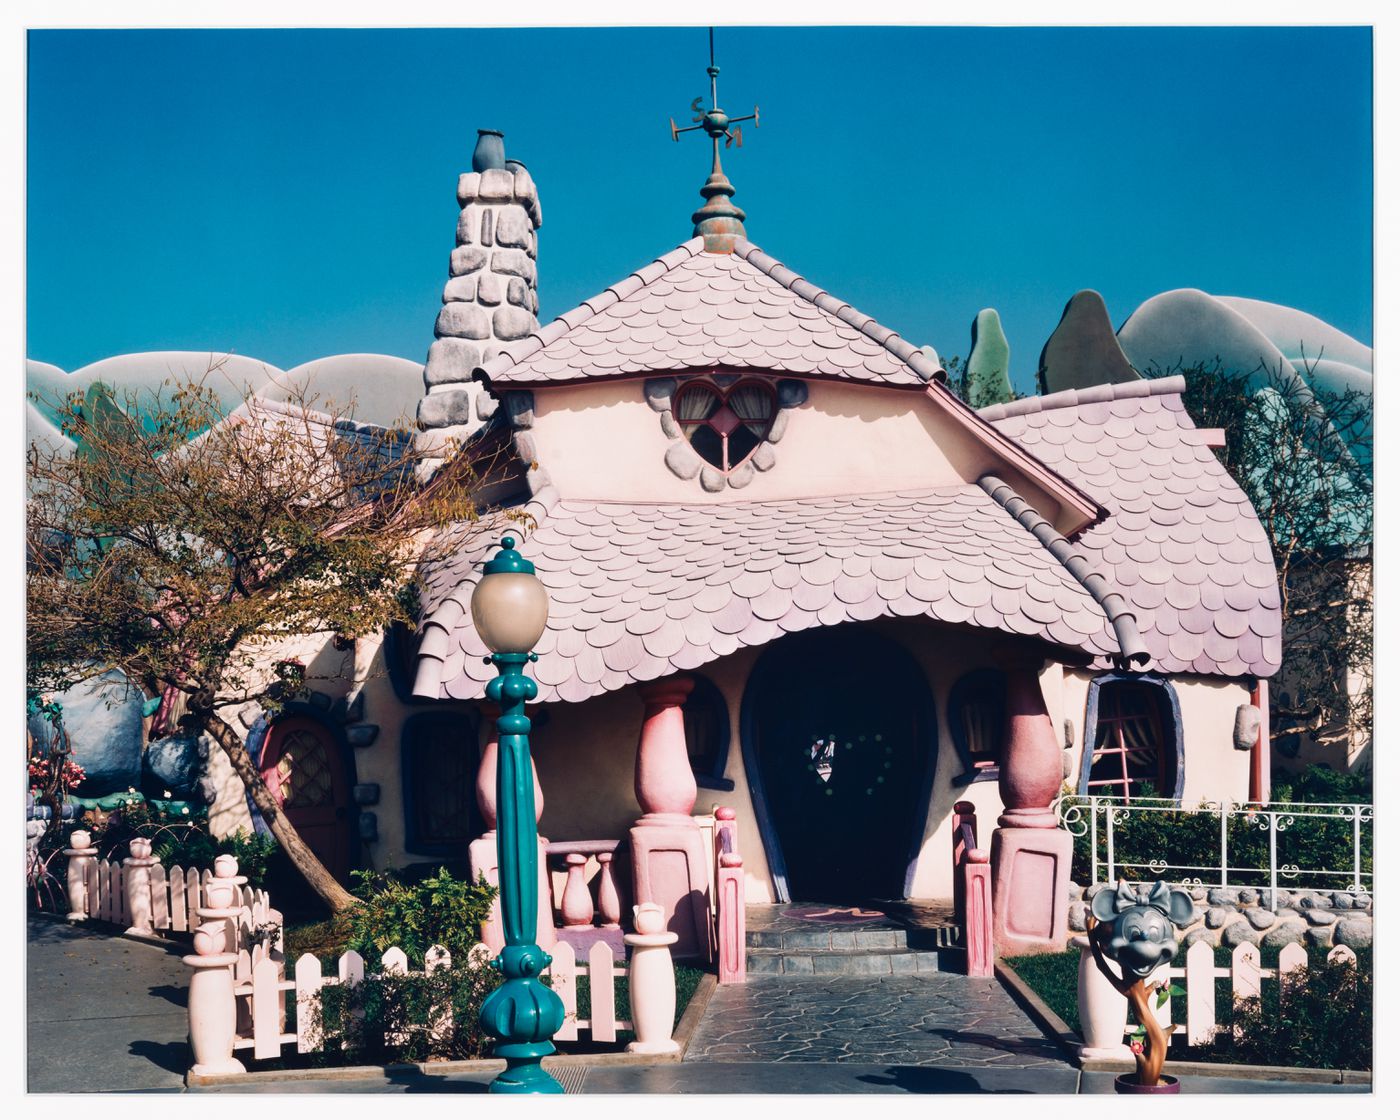 View of Minnie Mouse's house in Mickey's Toontown, Disneyland